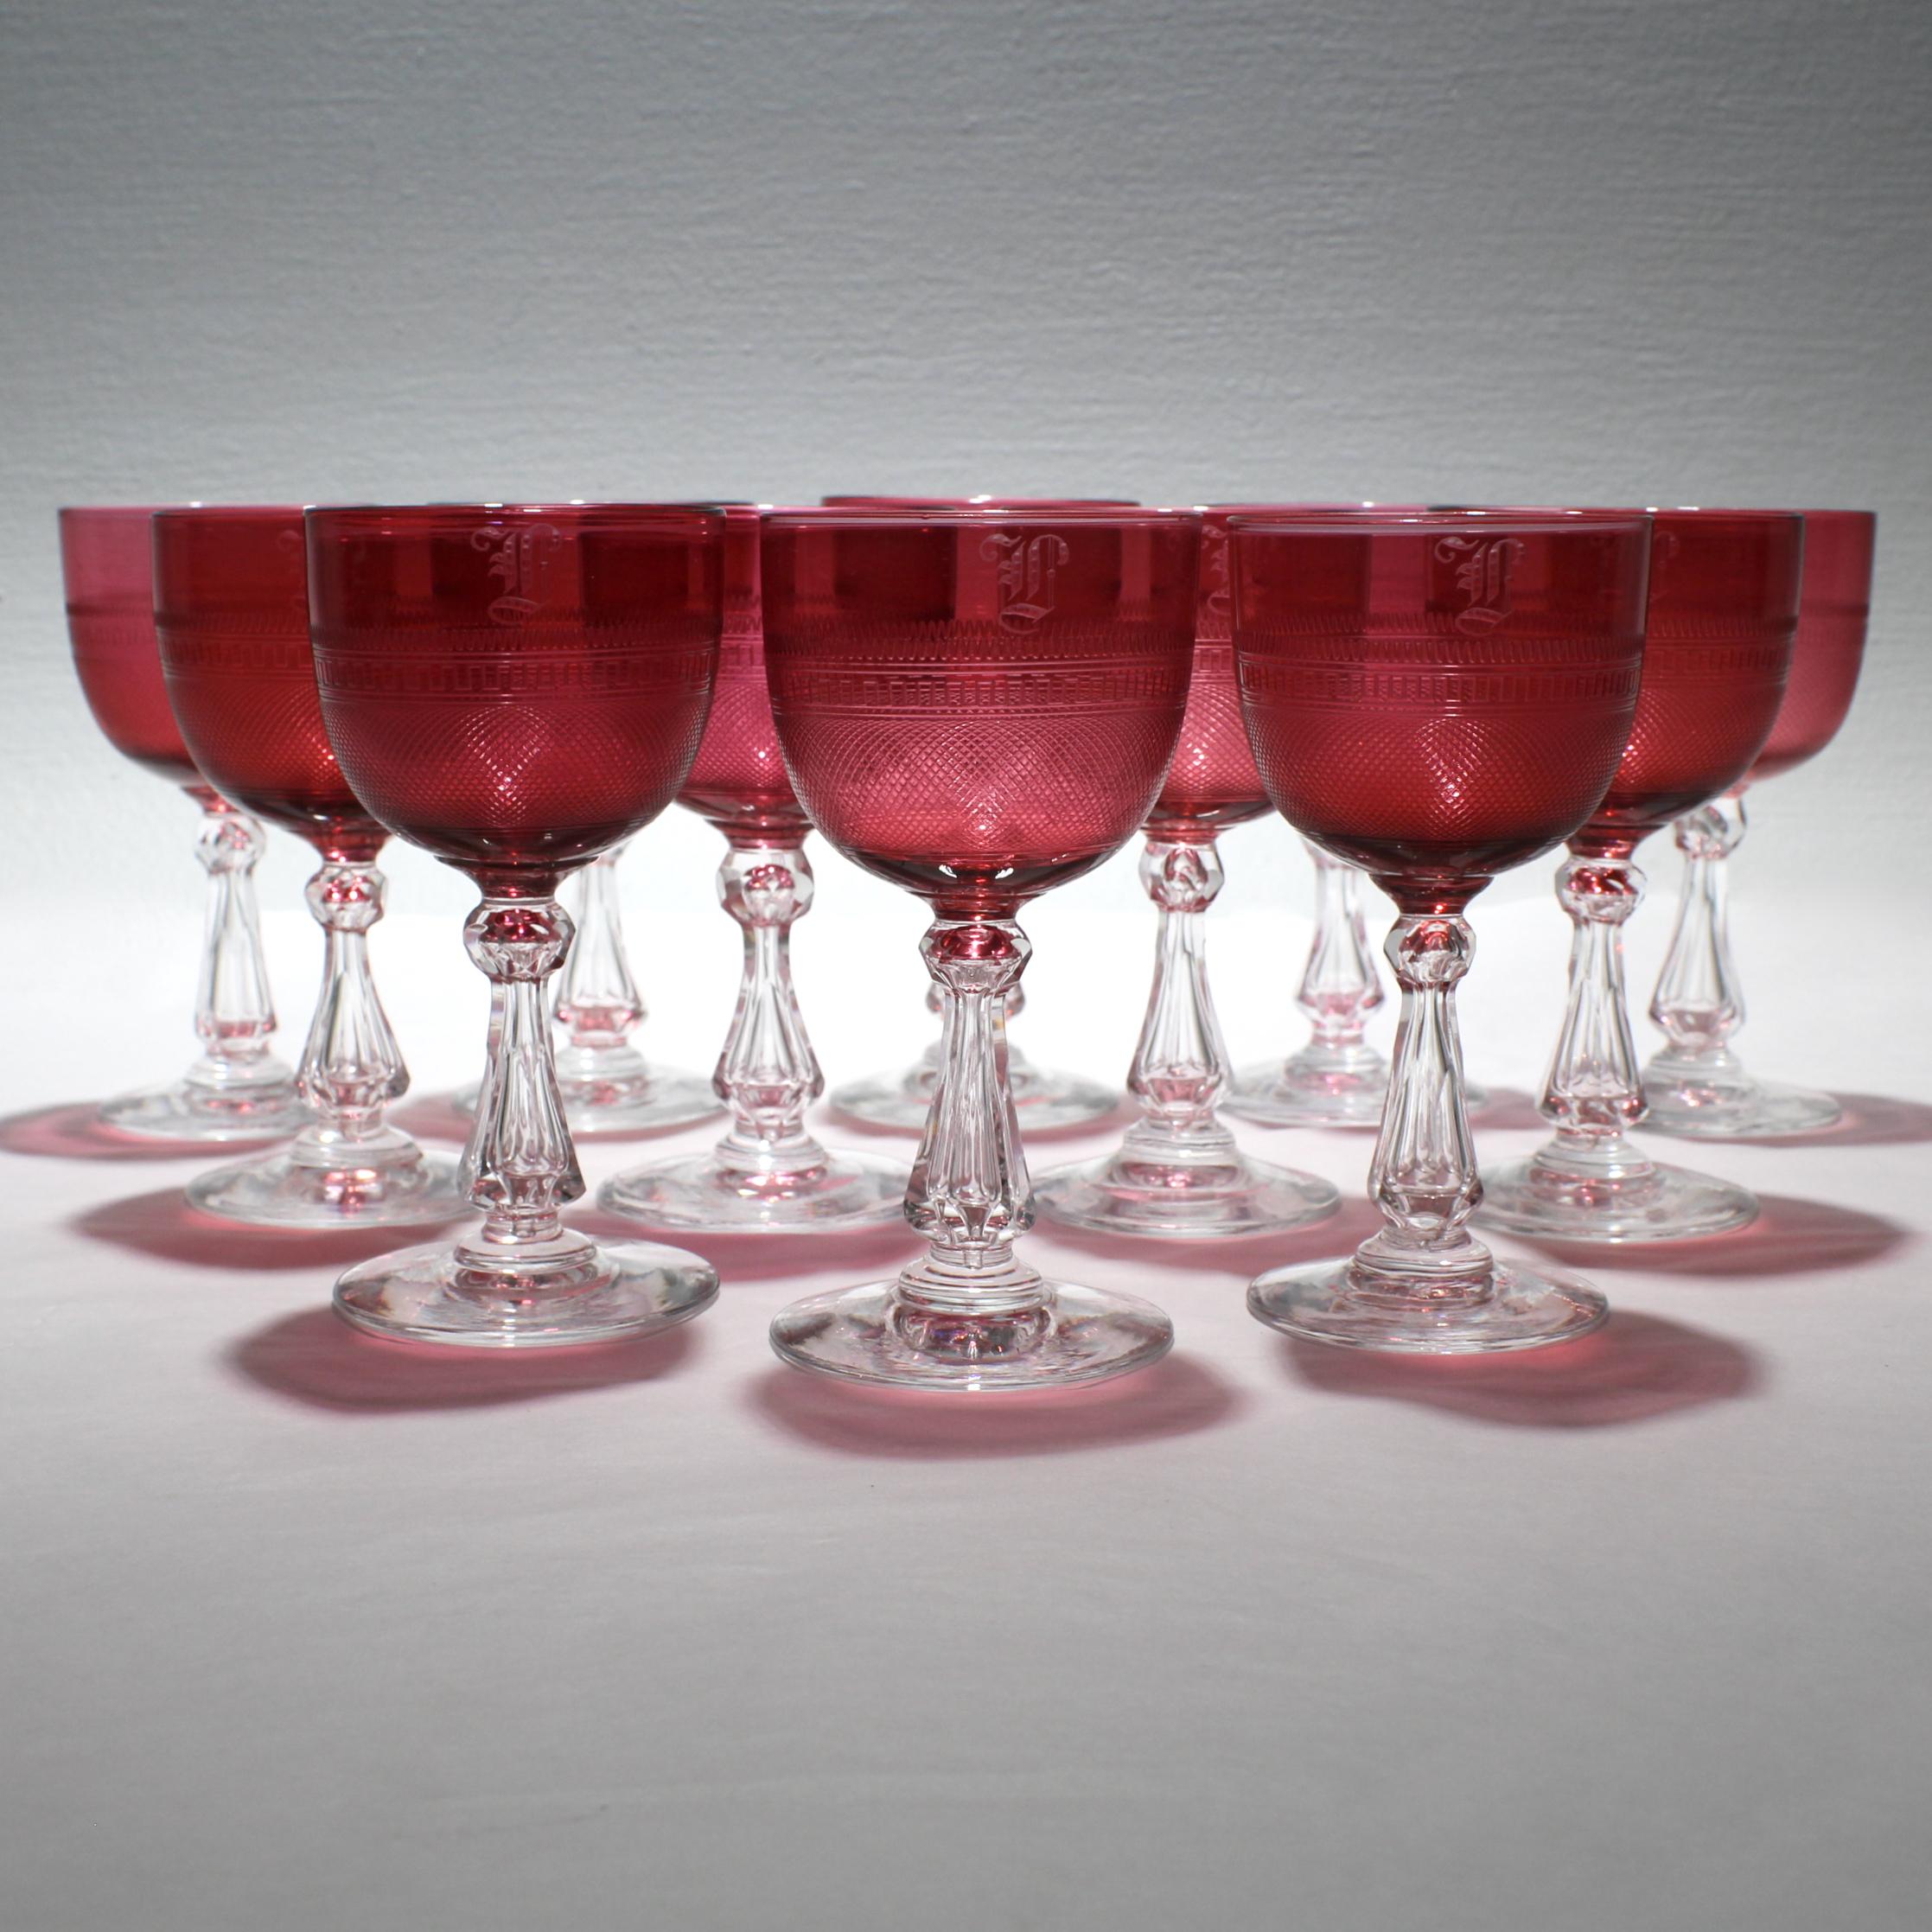 A very fine set of 12 antique English cranberry cordial or sherry wine glasses.

Each has a clear, faceted stem and a red bowl with strawberry field and geometric wheel cut bands. In addition, ten of the stems have an engraved monogram. (Perhaps an